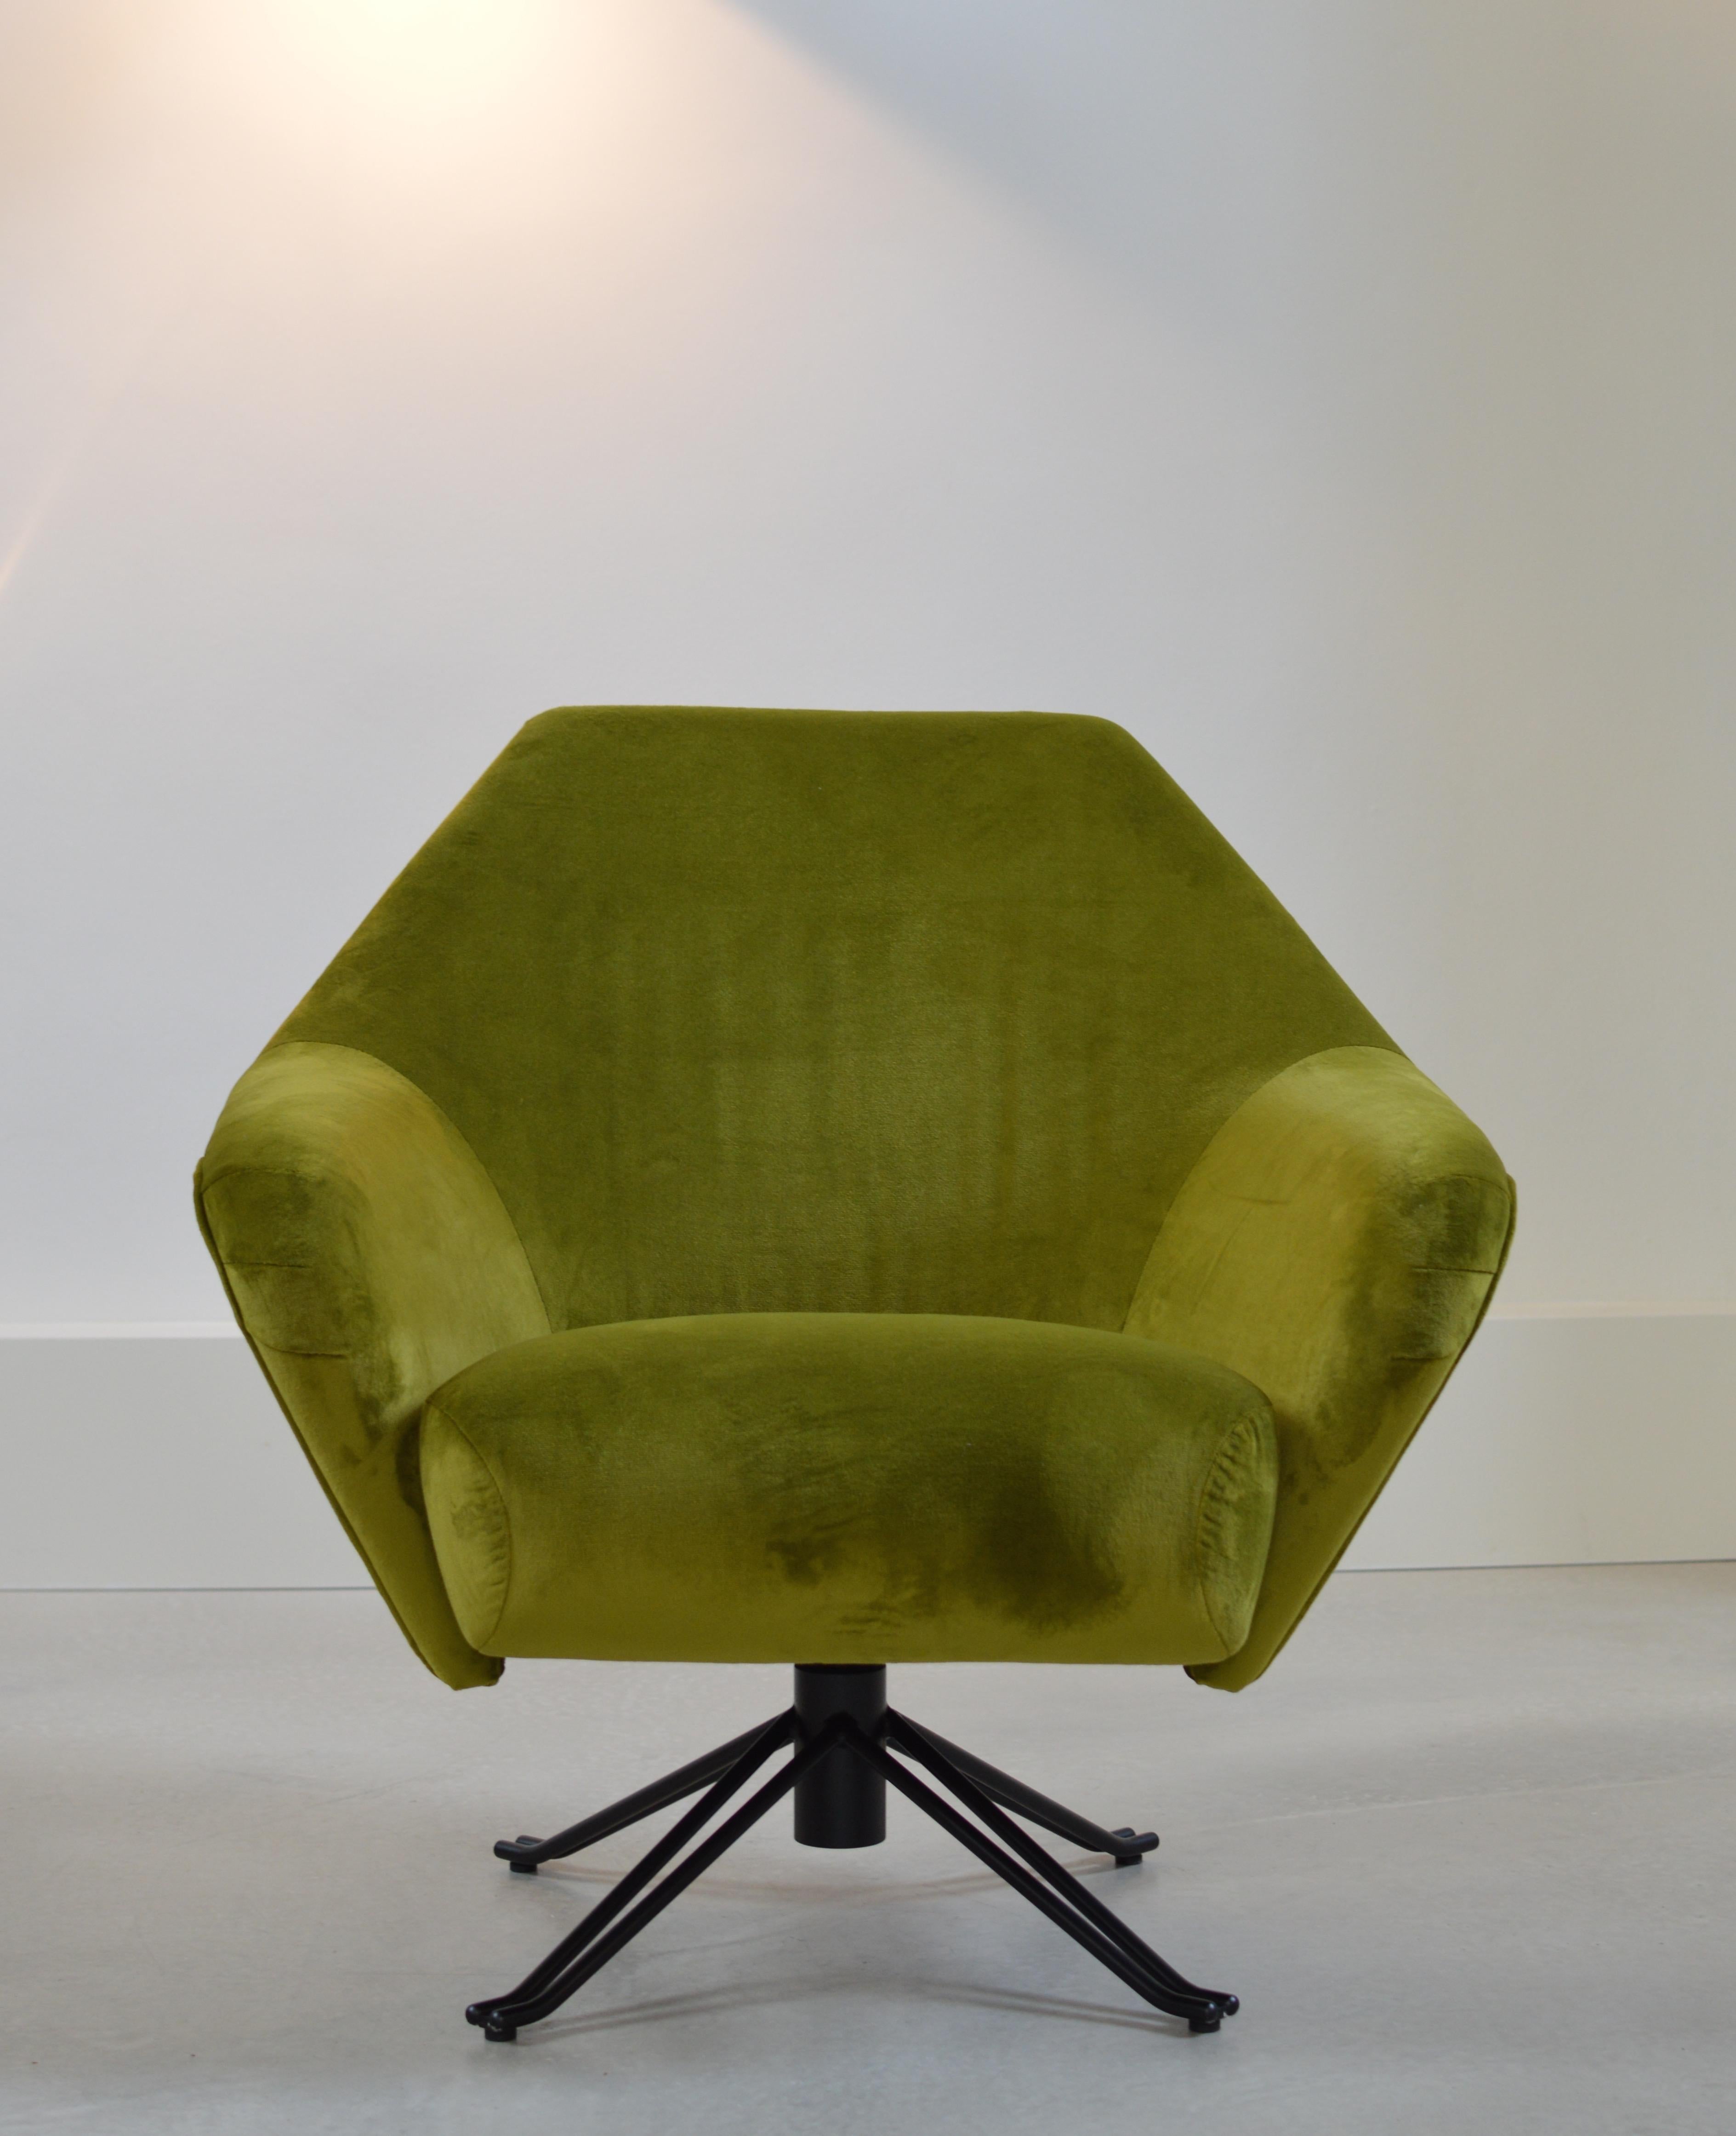 P32 armchair by Osvaldo Borsani, designed in 1956. Unlike other models that appeared in the same period, it boasted an innovative combination of seat movements. The chair is not only able to swivel and return automatically to its original position,